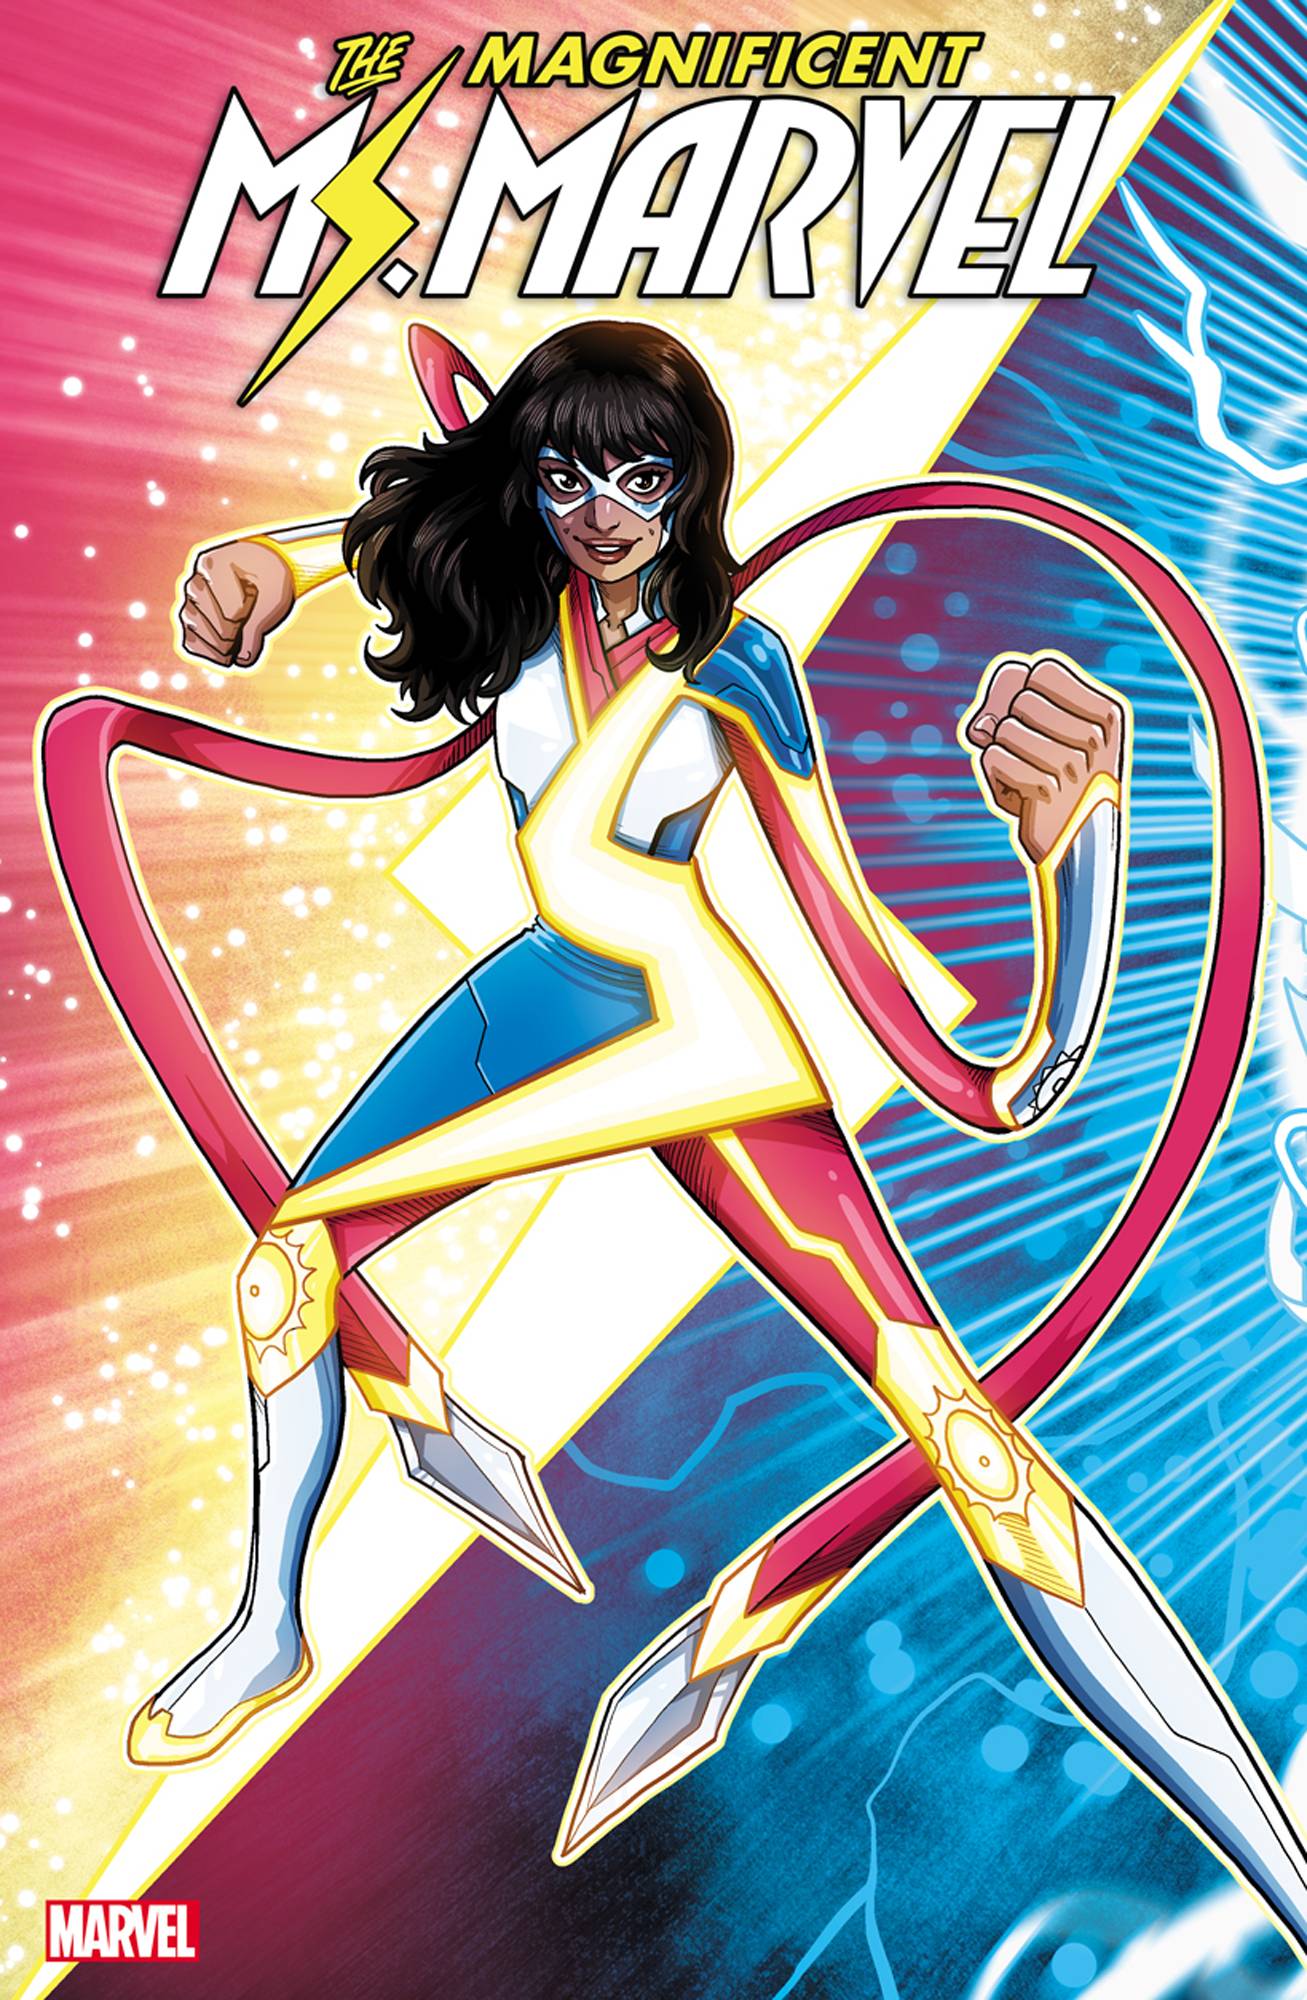 MAGNIFICENT MS MARVEL #7 2nd Print Luciano Vecchio Connecting Variant (01/29/2020) MARVEL